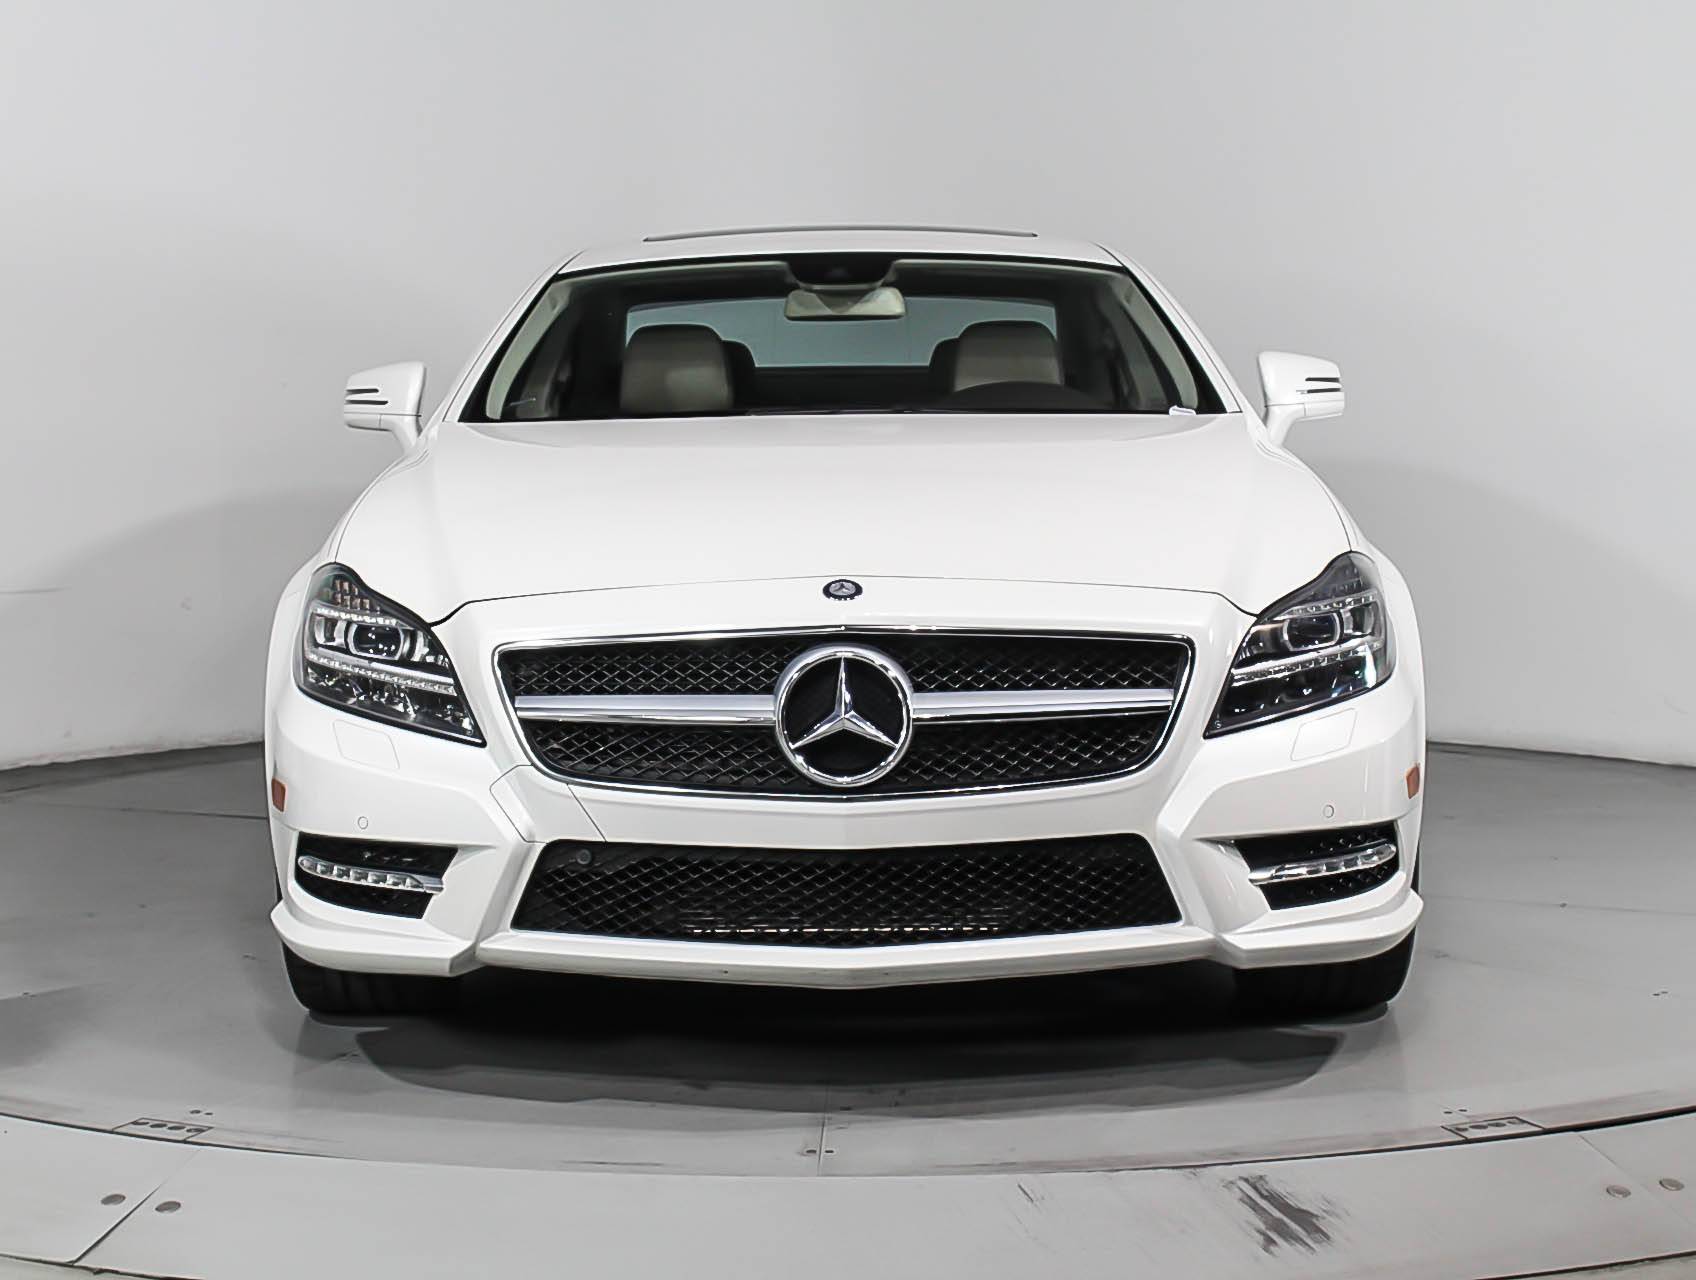 Florida Fine Cars - Used MERCEDES-BENZ CLS CLASS 2014 MIAMI CLS550